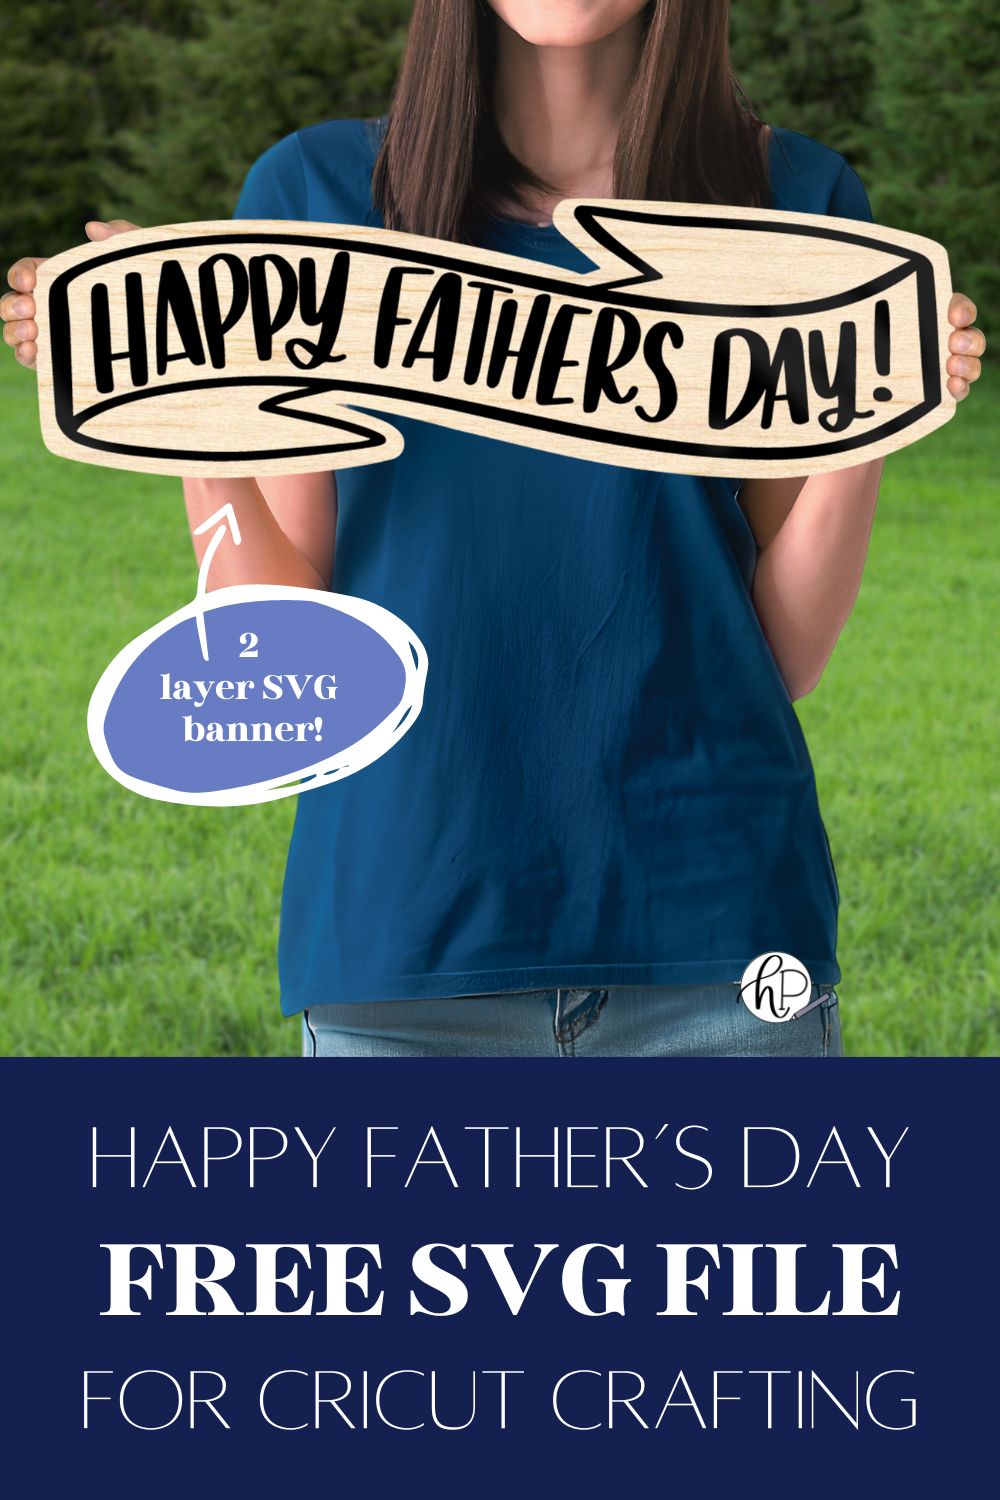 text over reads happy father's day free SVG file for cricut crafting, additional text over reads '2 layer SVG banner!' image of a girl holding a wooden sign made from this cut file- the wood cut with Cricut and black iron on vinyl used on top.